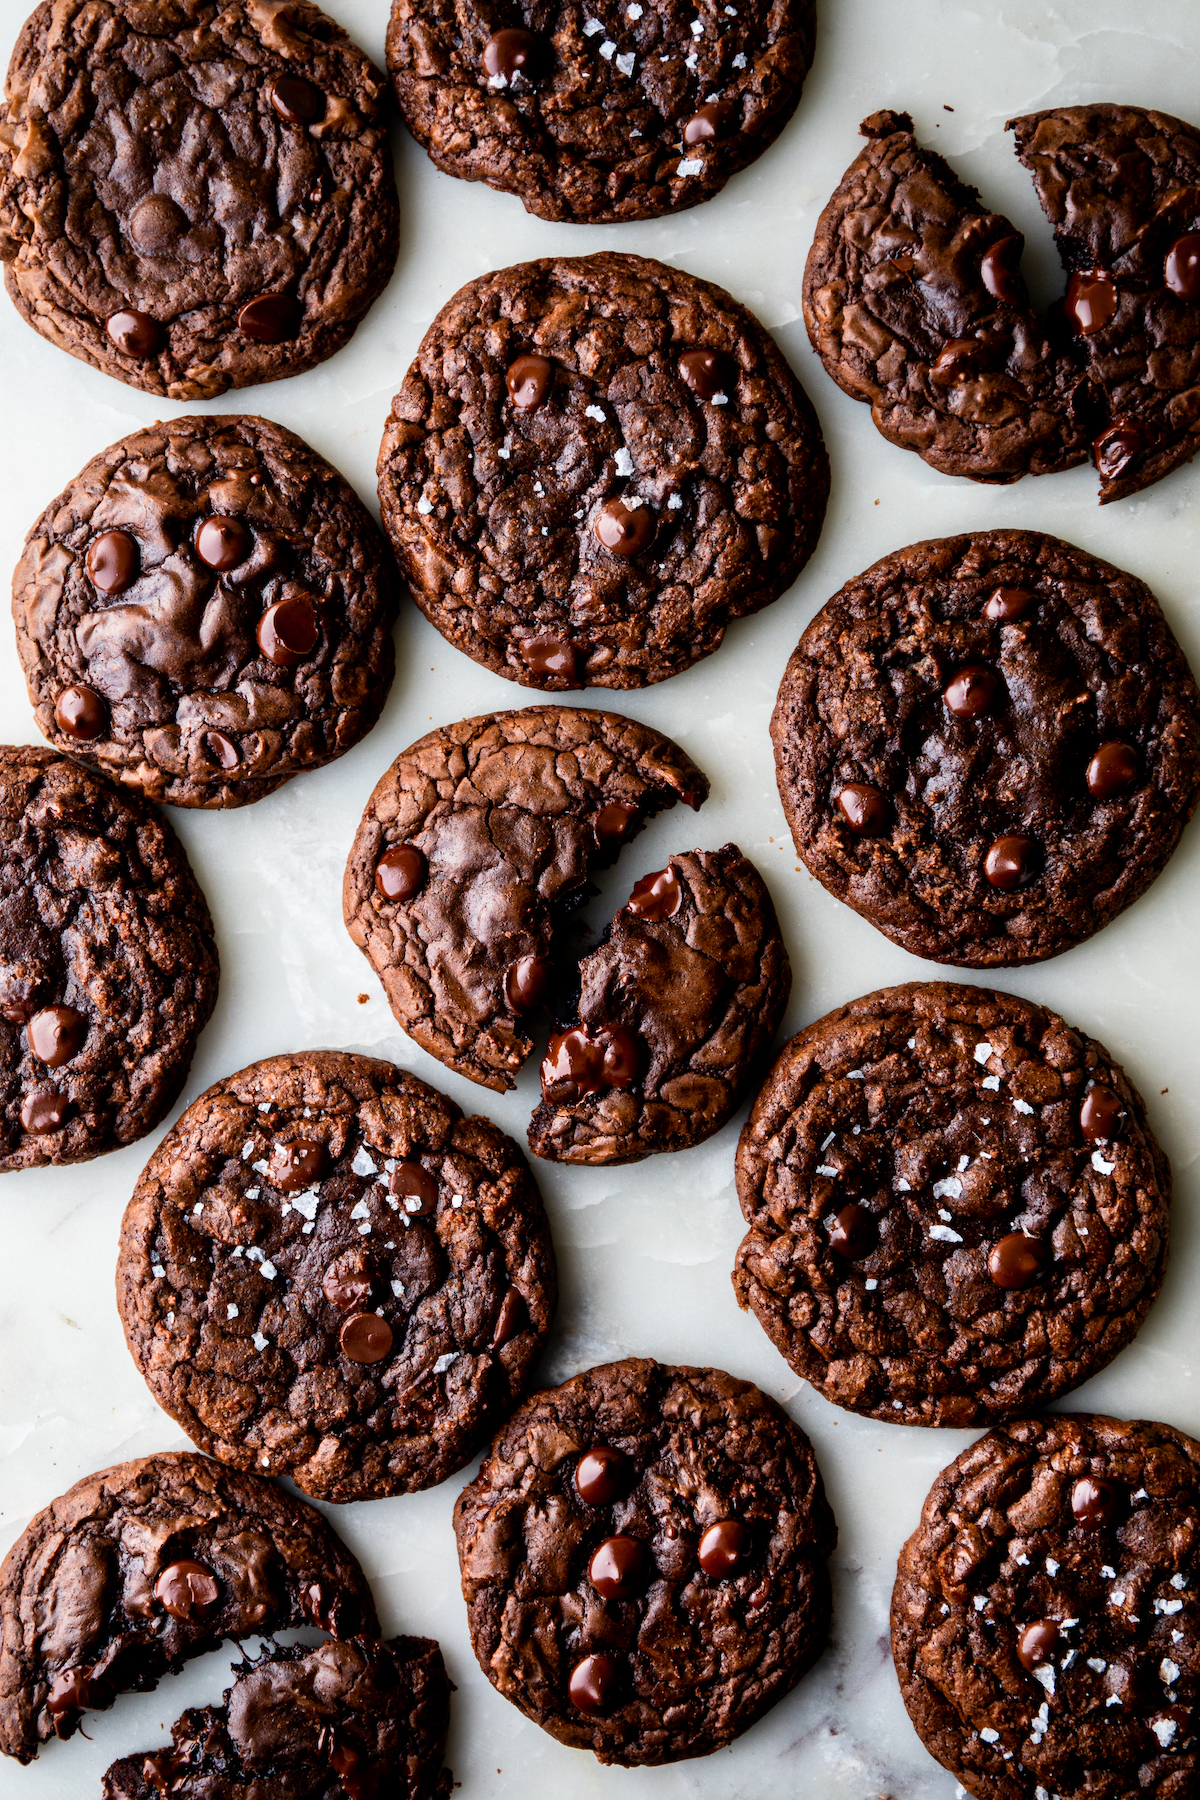 Lots of dark chocolate cookies with glossy chocolate chips.